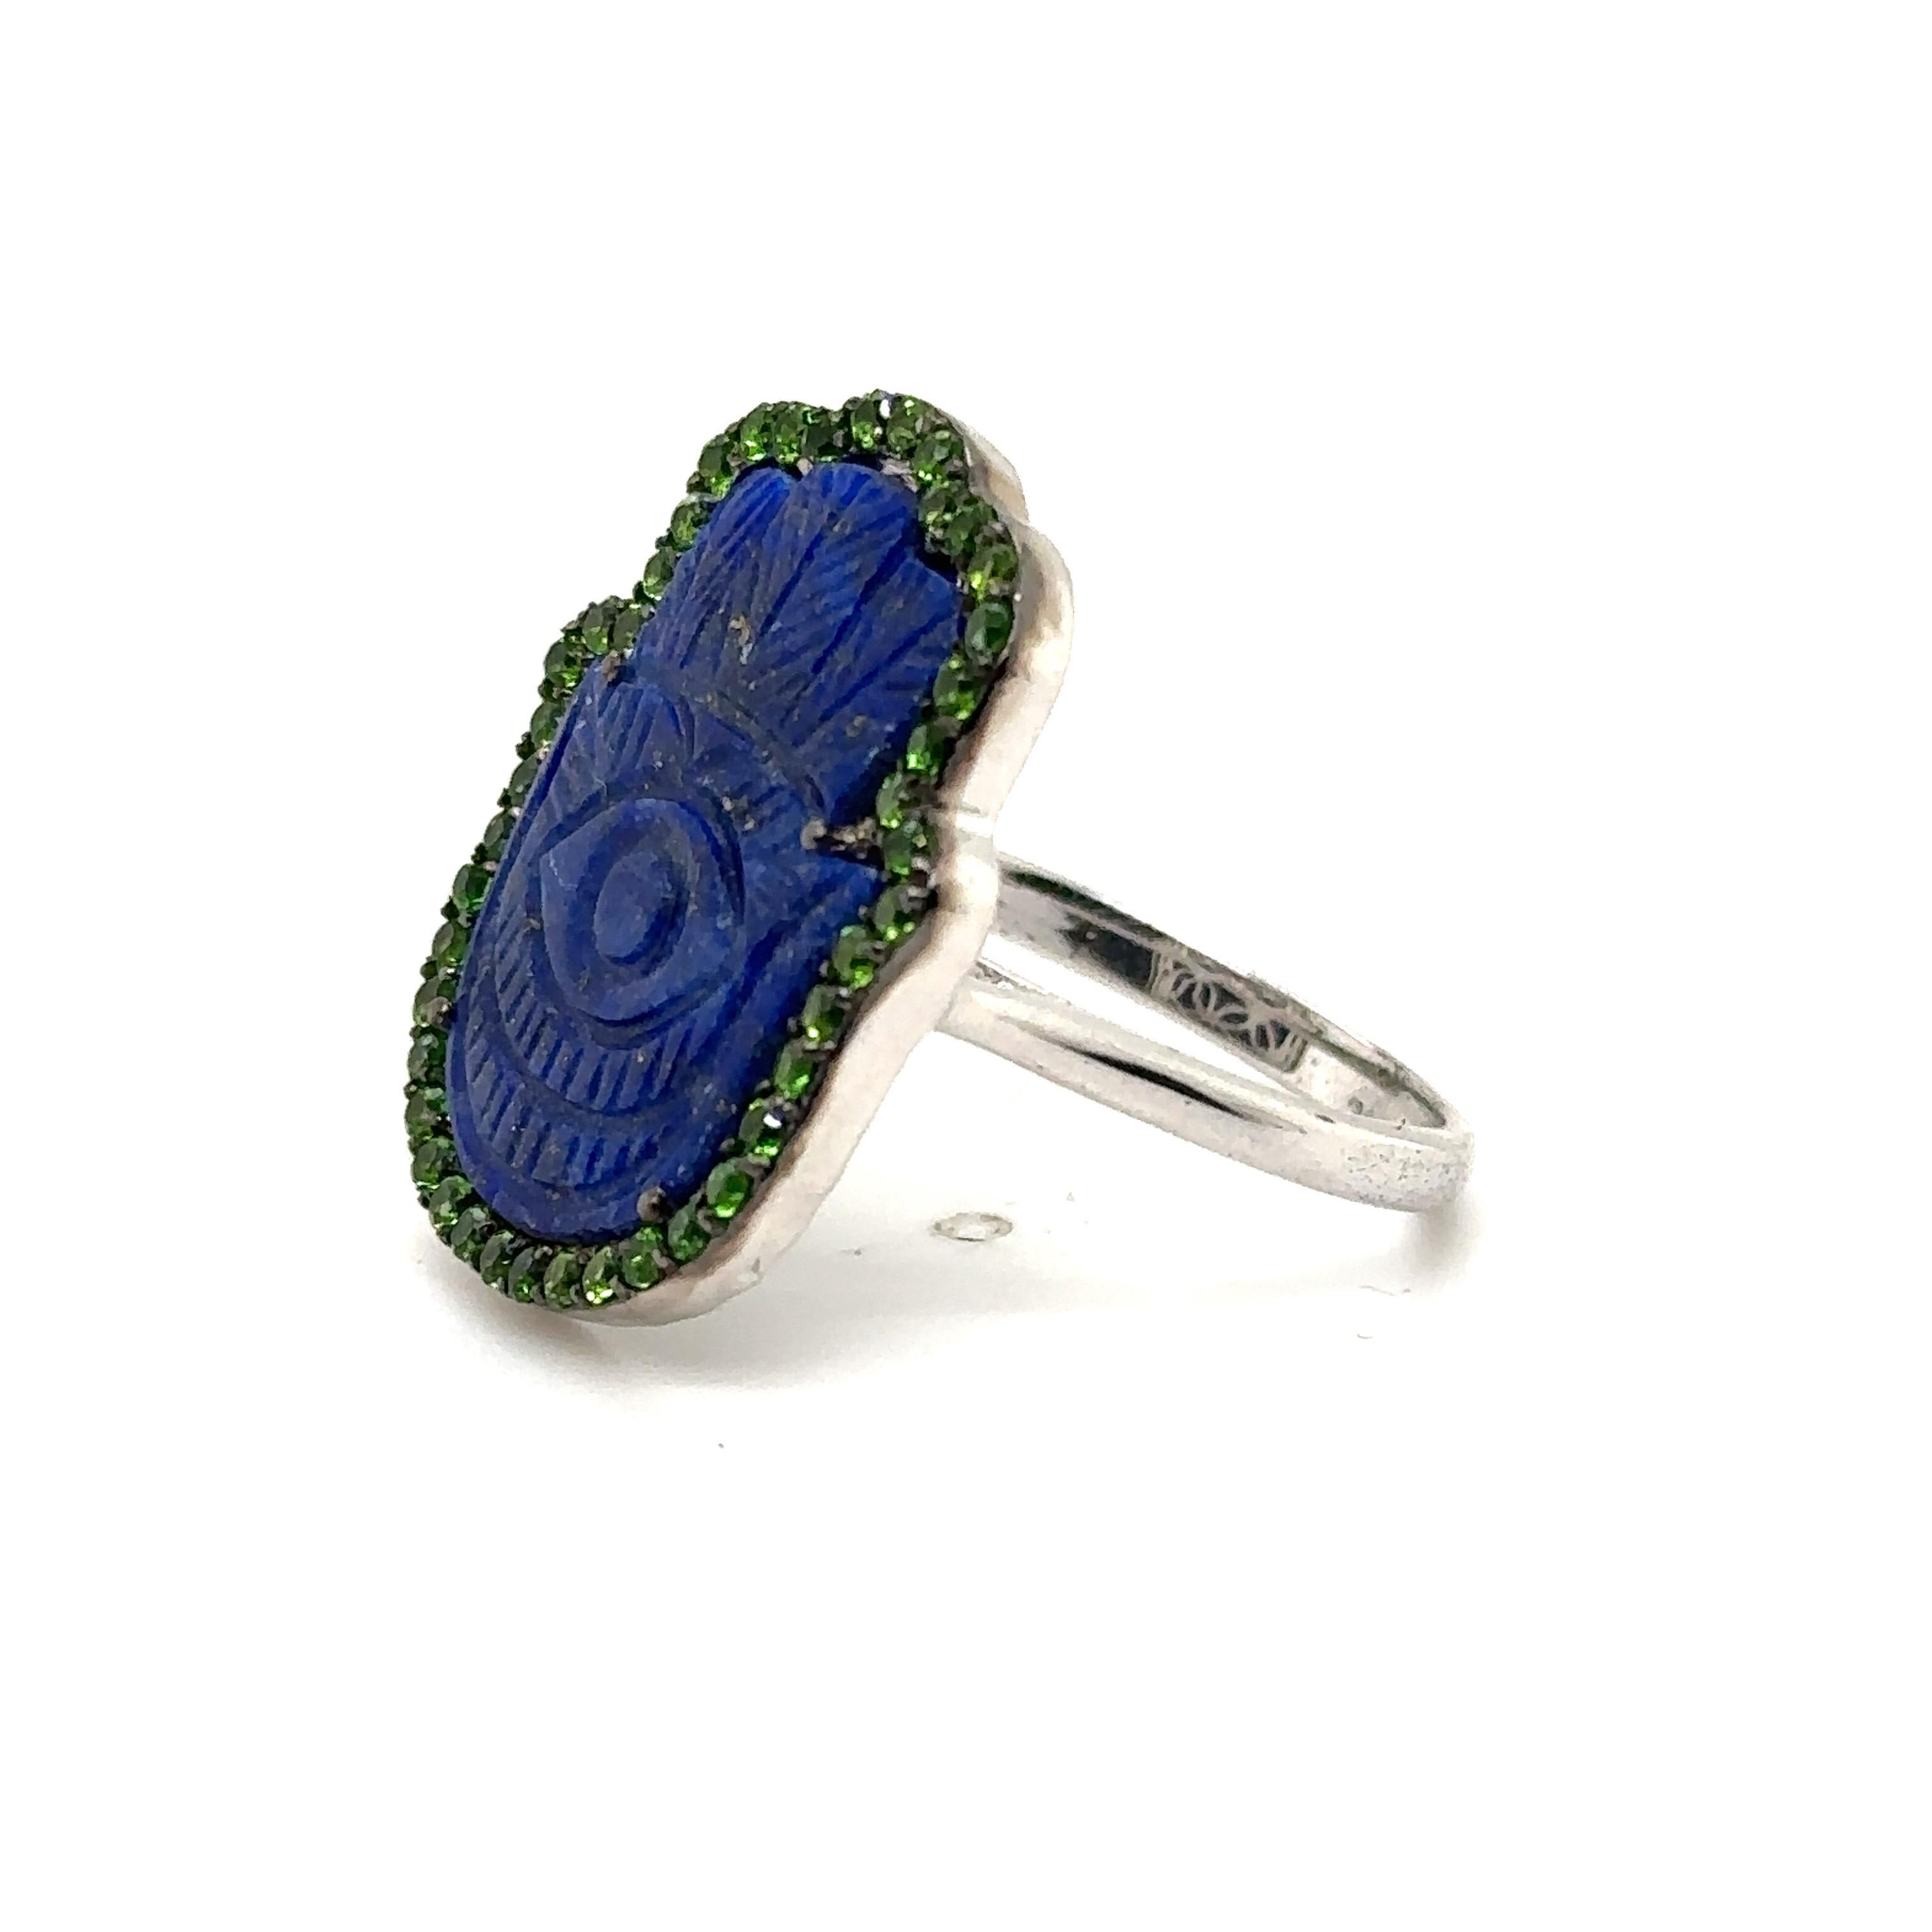 STERLING SILVER 10.00CT LAPIS HAMSA RING with 0.65CT CHROME DIOPSIDES 
Metal: Sterling Silver
Stones Info: 10.00CT LAPIS HAMSA & 0.65 CT CHROME DIOPSIDES
Total Stones Weight: 10.65 cwt.
Item Weight:  6.40 gm
Ring Size: 8 (Re-sizable)
Measurements: